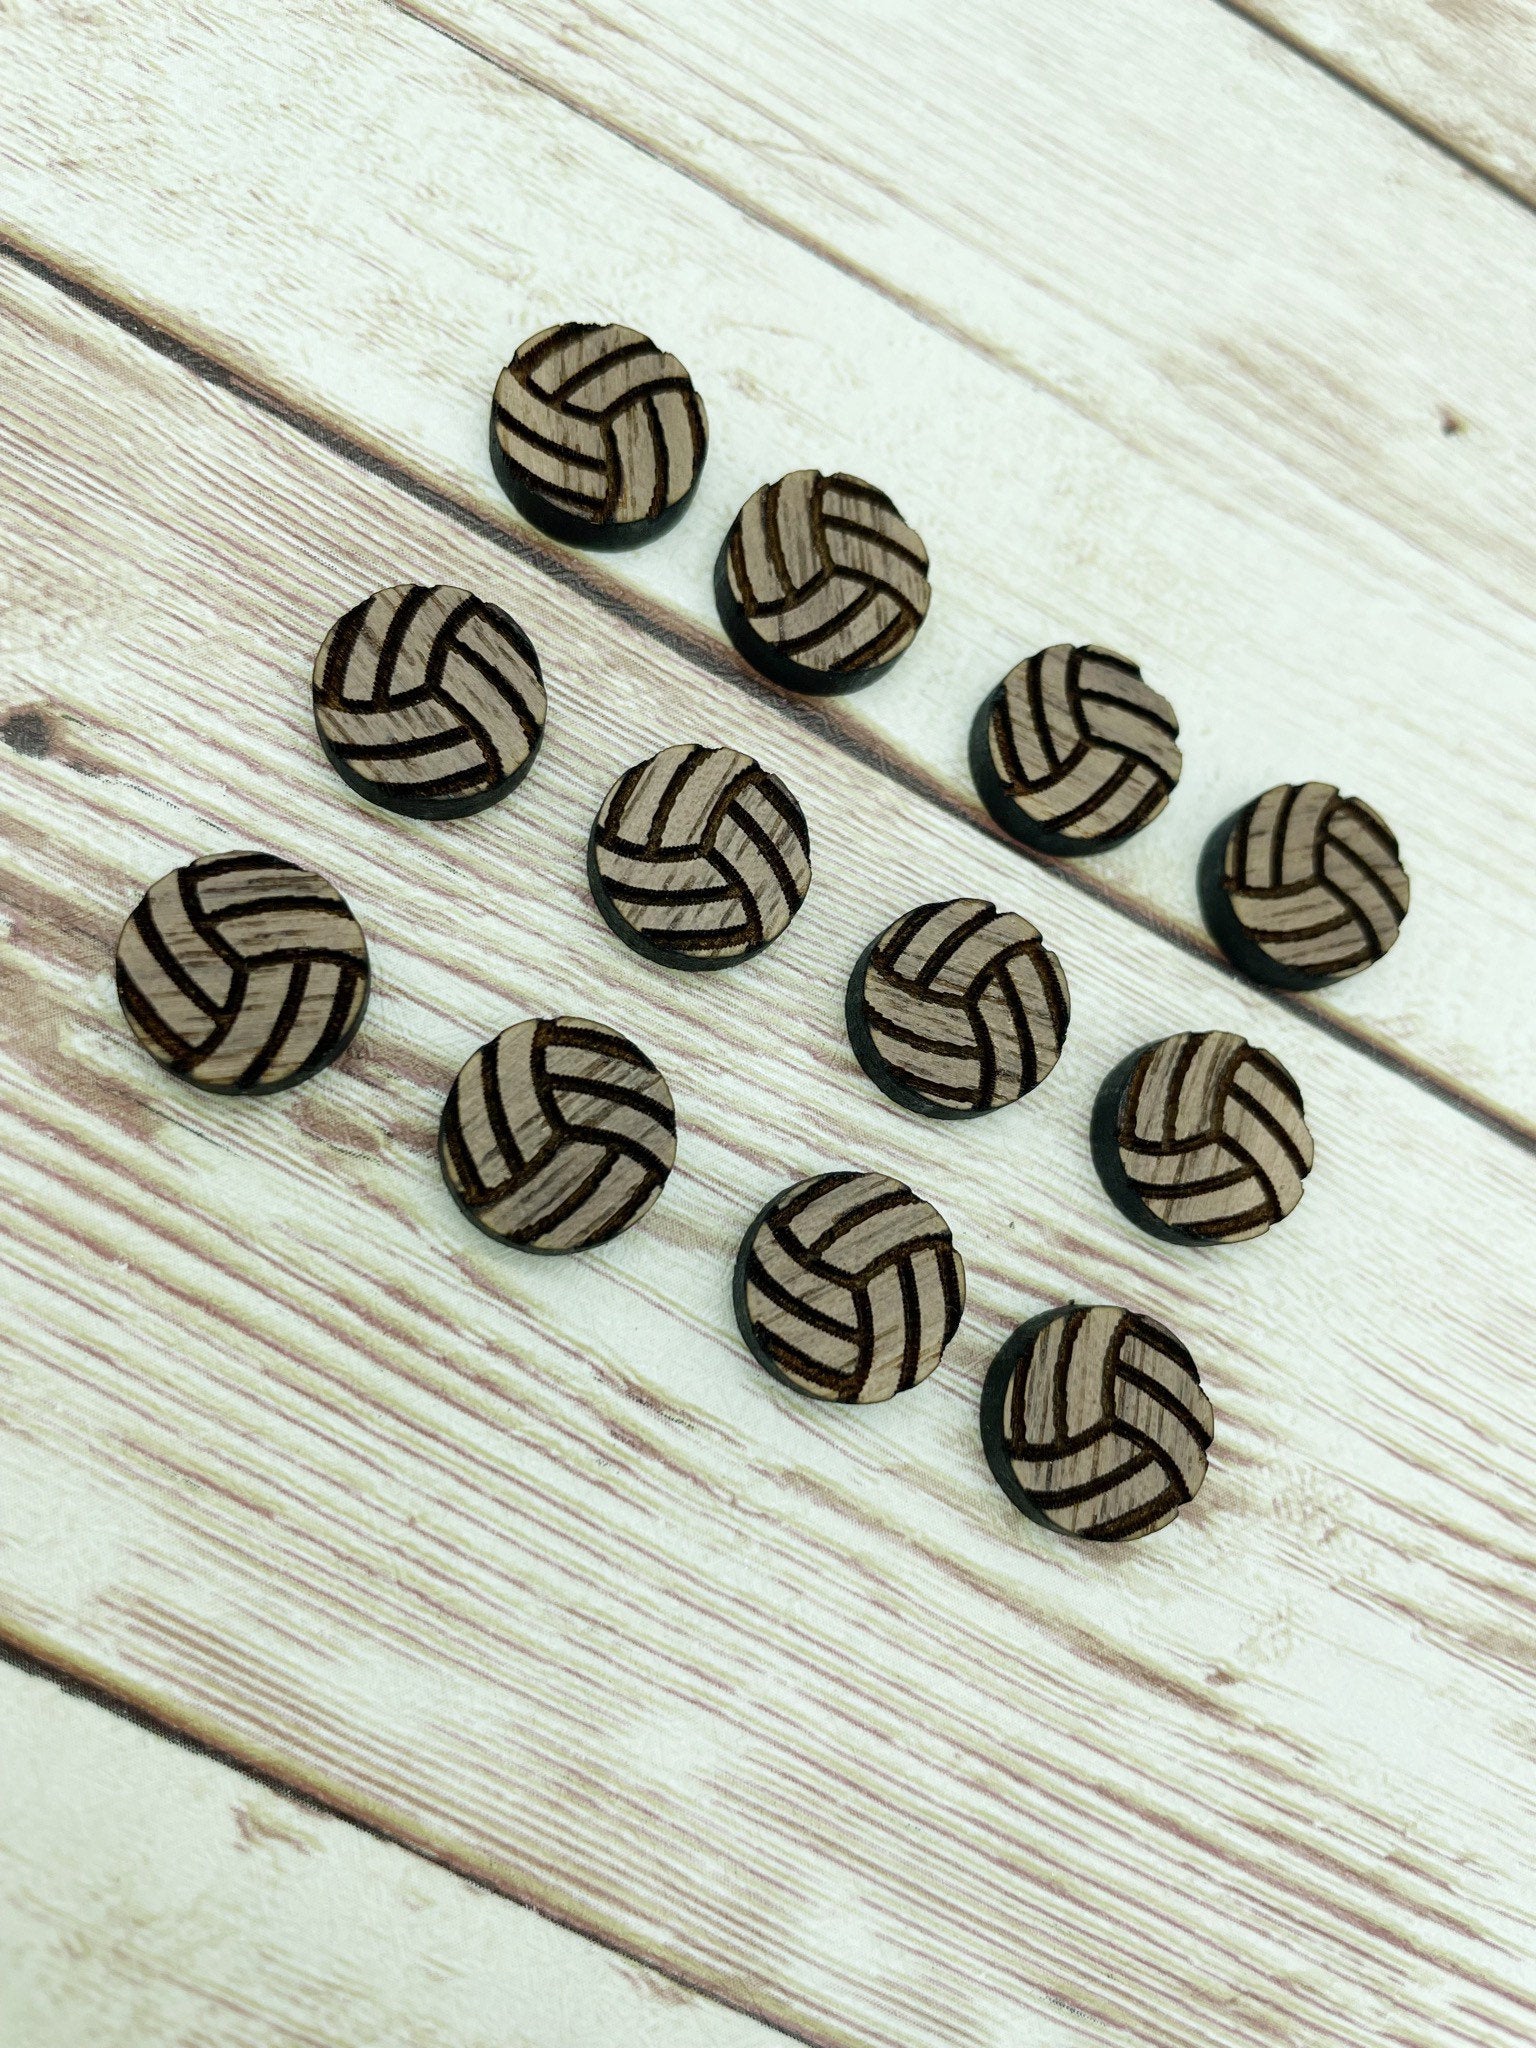 Finished Walnut Stud Volleyball Earring Blanks Set of 6 Pair DIY Jewelry Making